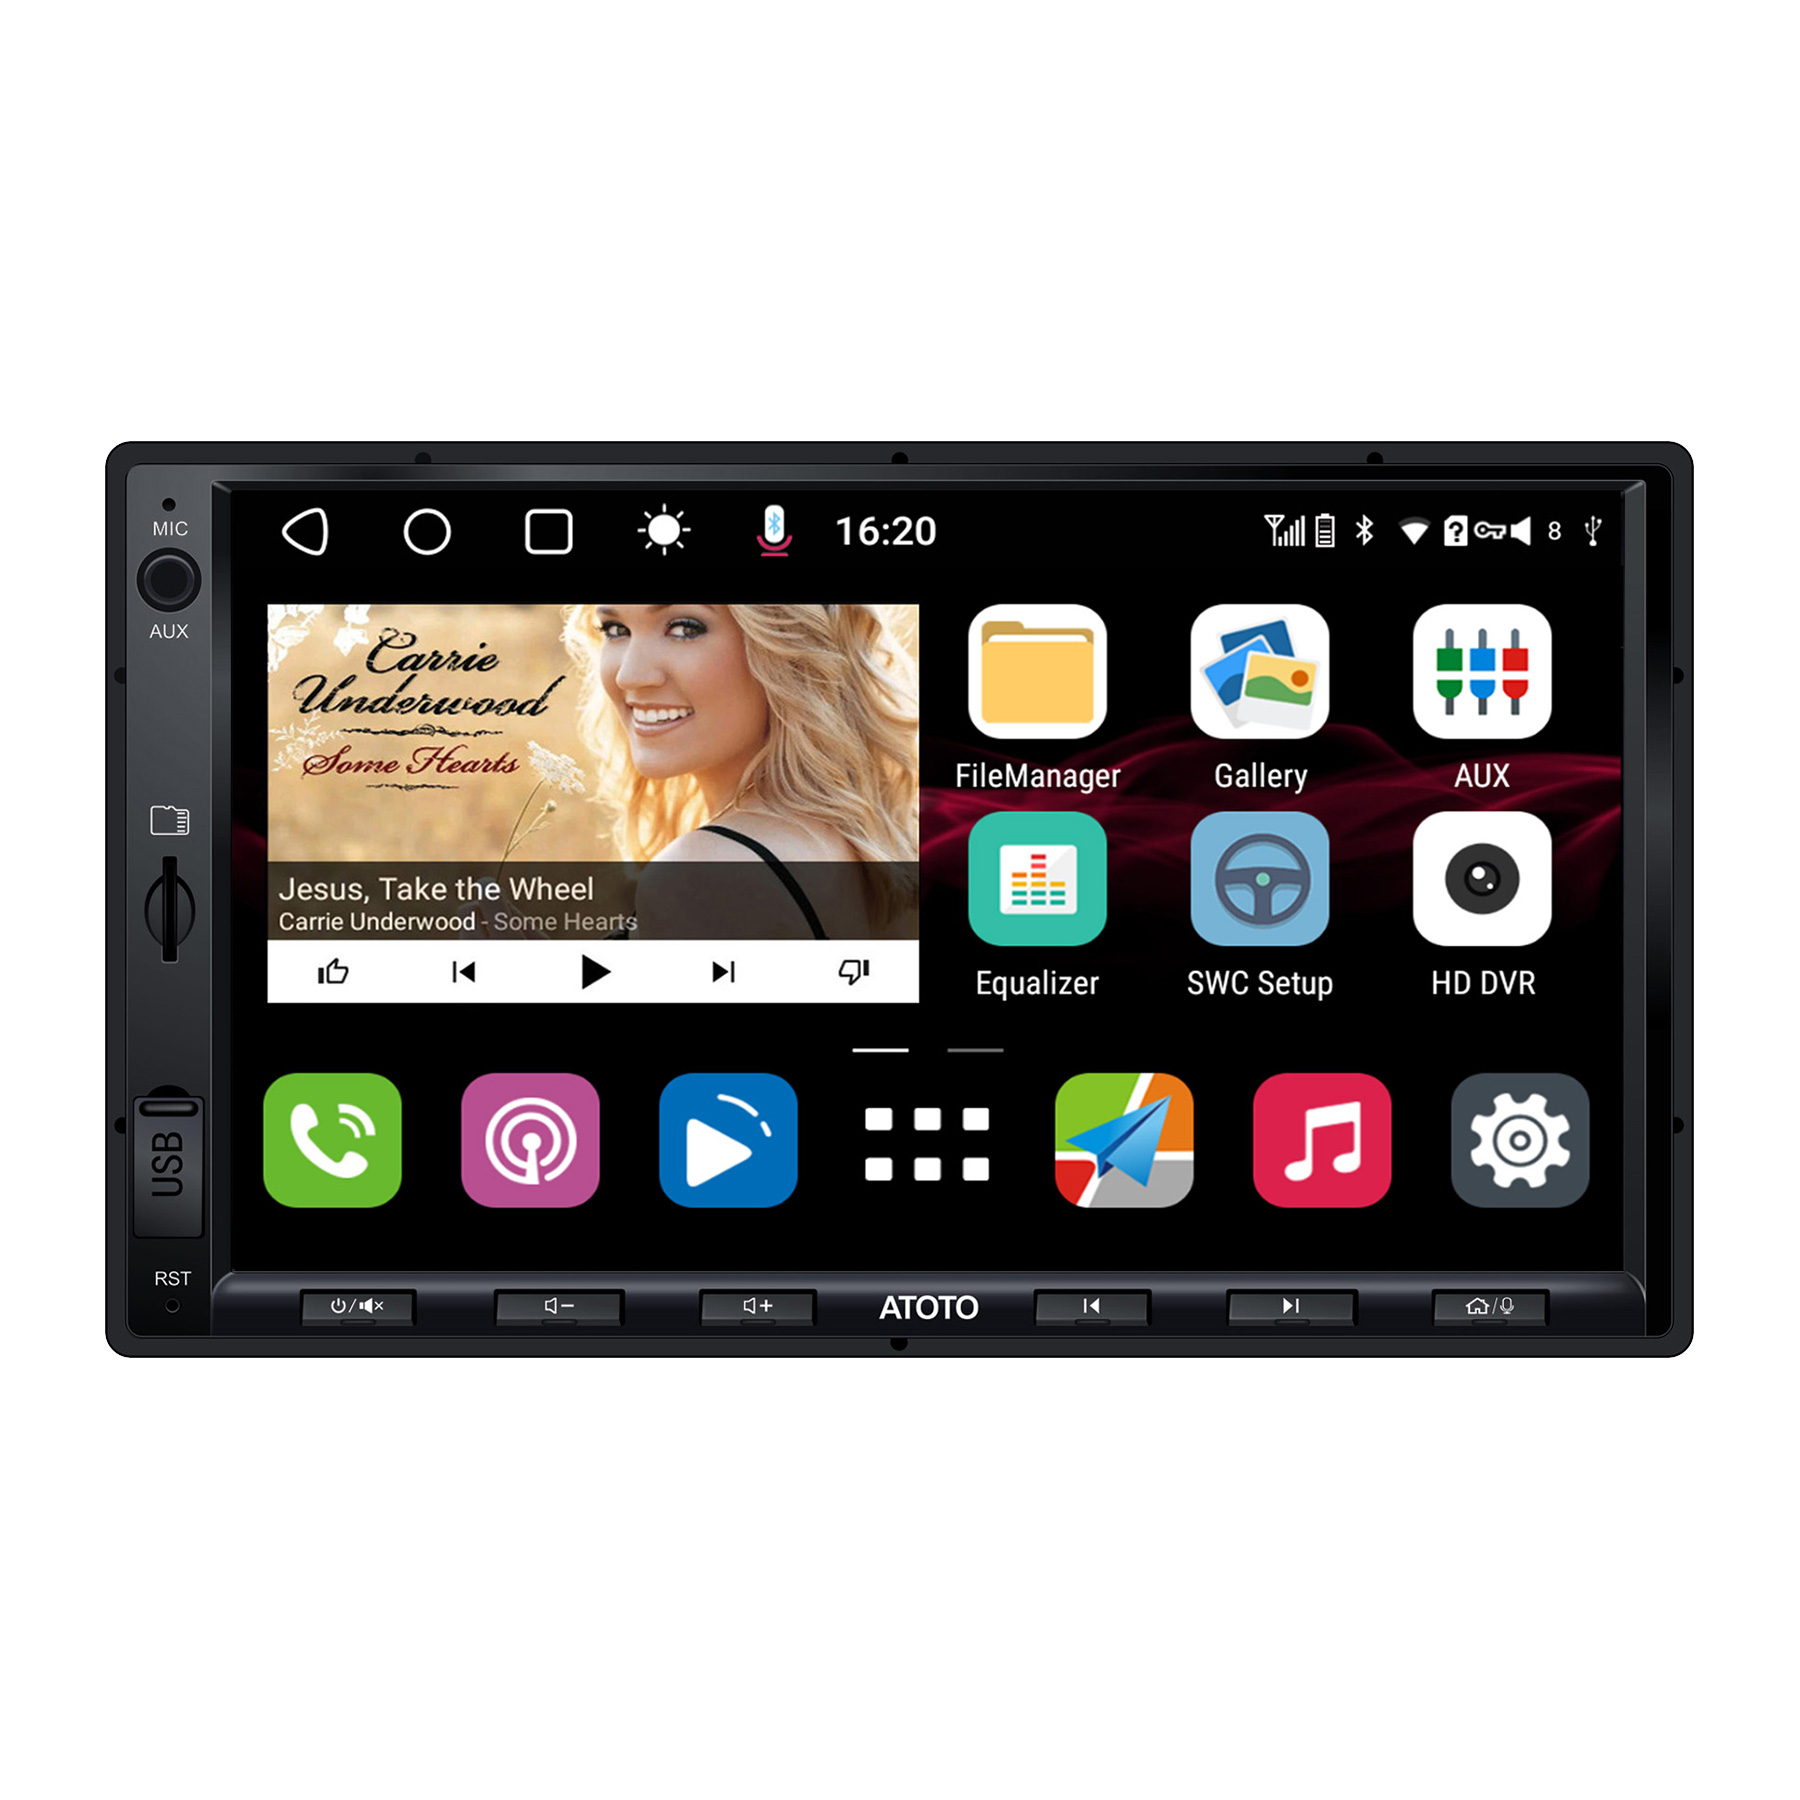 New] ATOTO S8 Standard 7 inch Double-DIN Car Stereo Android in